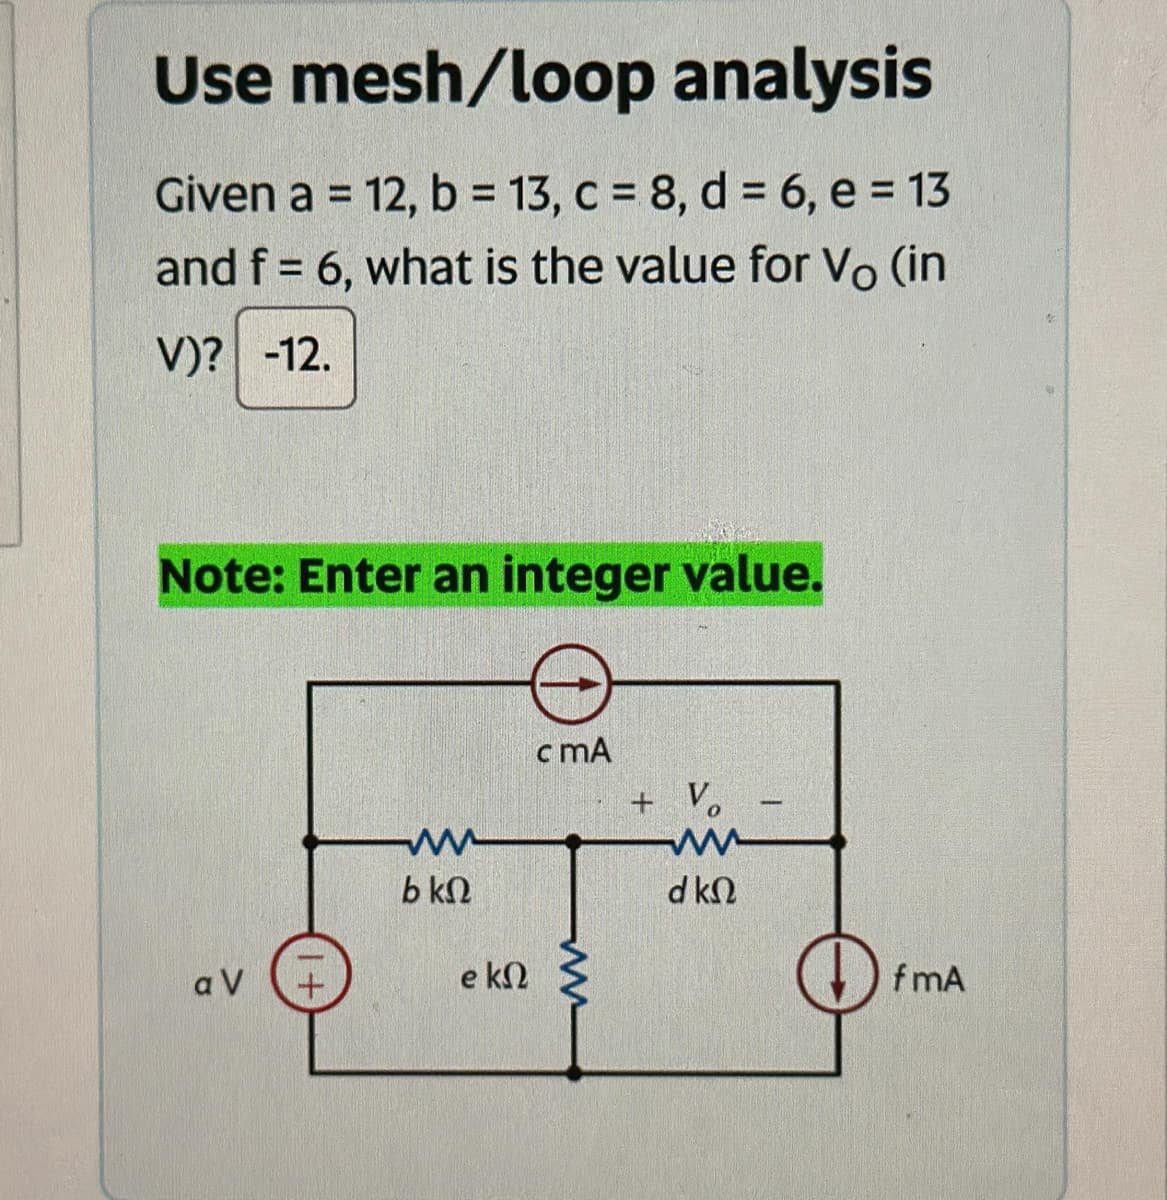 Use mesh/loop analysis
Given a = 12, b = 13, c = 8, d = 6, e = 13
and f = 6, what is the value for Vo (in
V)? -12.
Note: Enter an integer value.
αν
1+
www
b ΚΩ
e k
c mA
m
+ Vo
ww
d ΚΩ
-
fmA